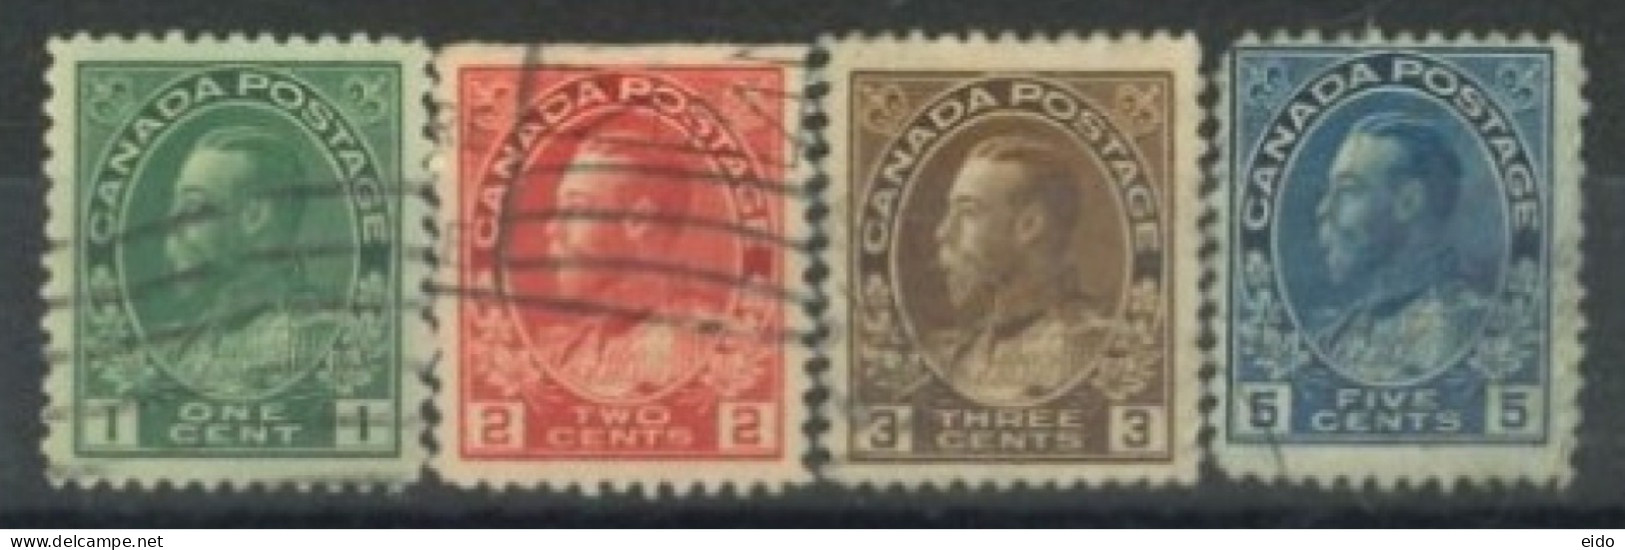 CANADA - 1912, KING GEORGE V STAMPS SET OF 4, USED. - Used Stamps